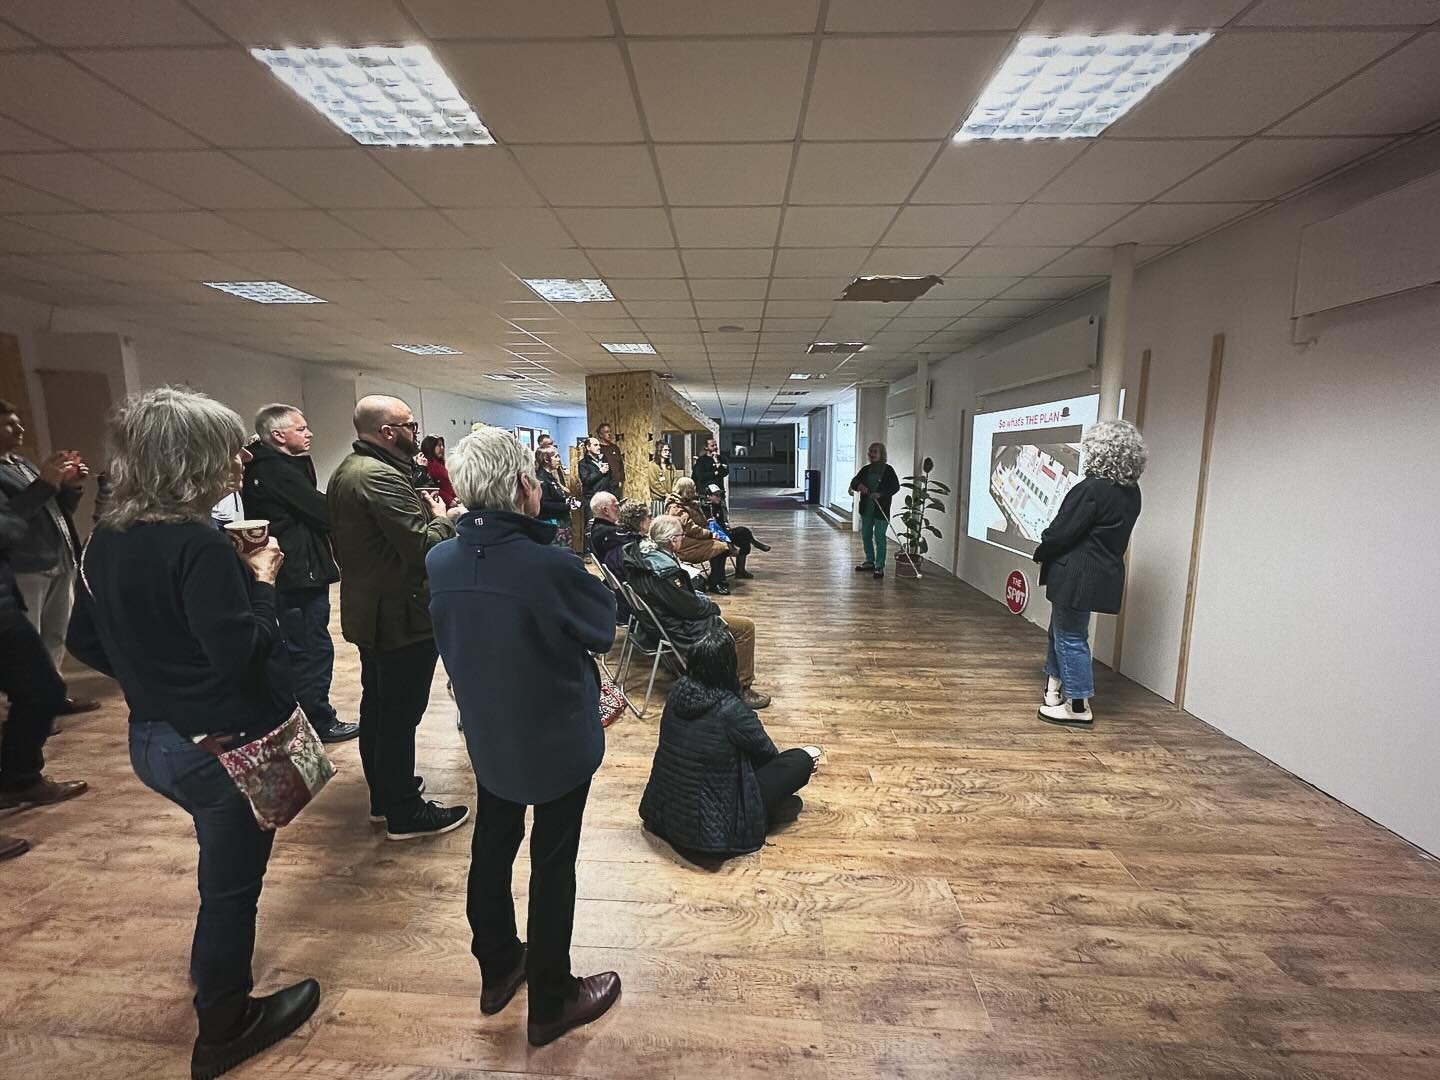 Huge thanks to the team working to turn The Old Mart in Ulverston into a community hub for inviting me along this afternoon to learn more about the project.

The Spot would be a community space run by and for the people who use it, supporting the com